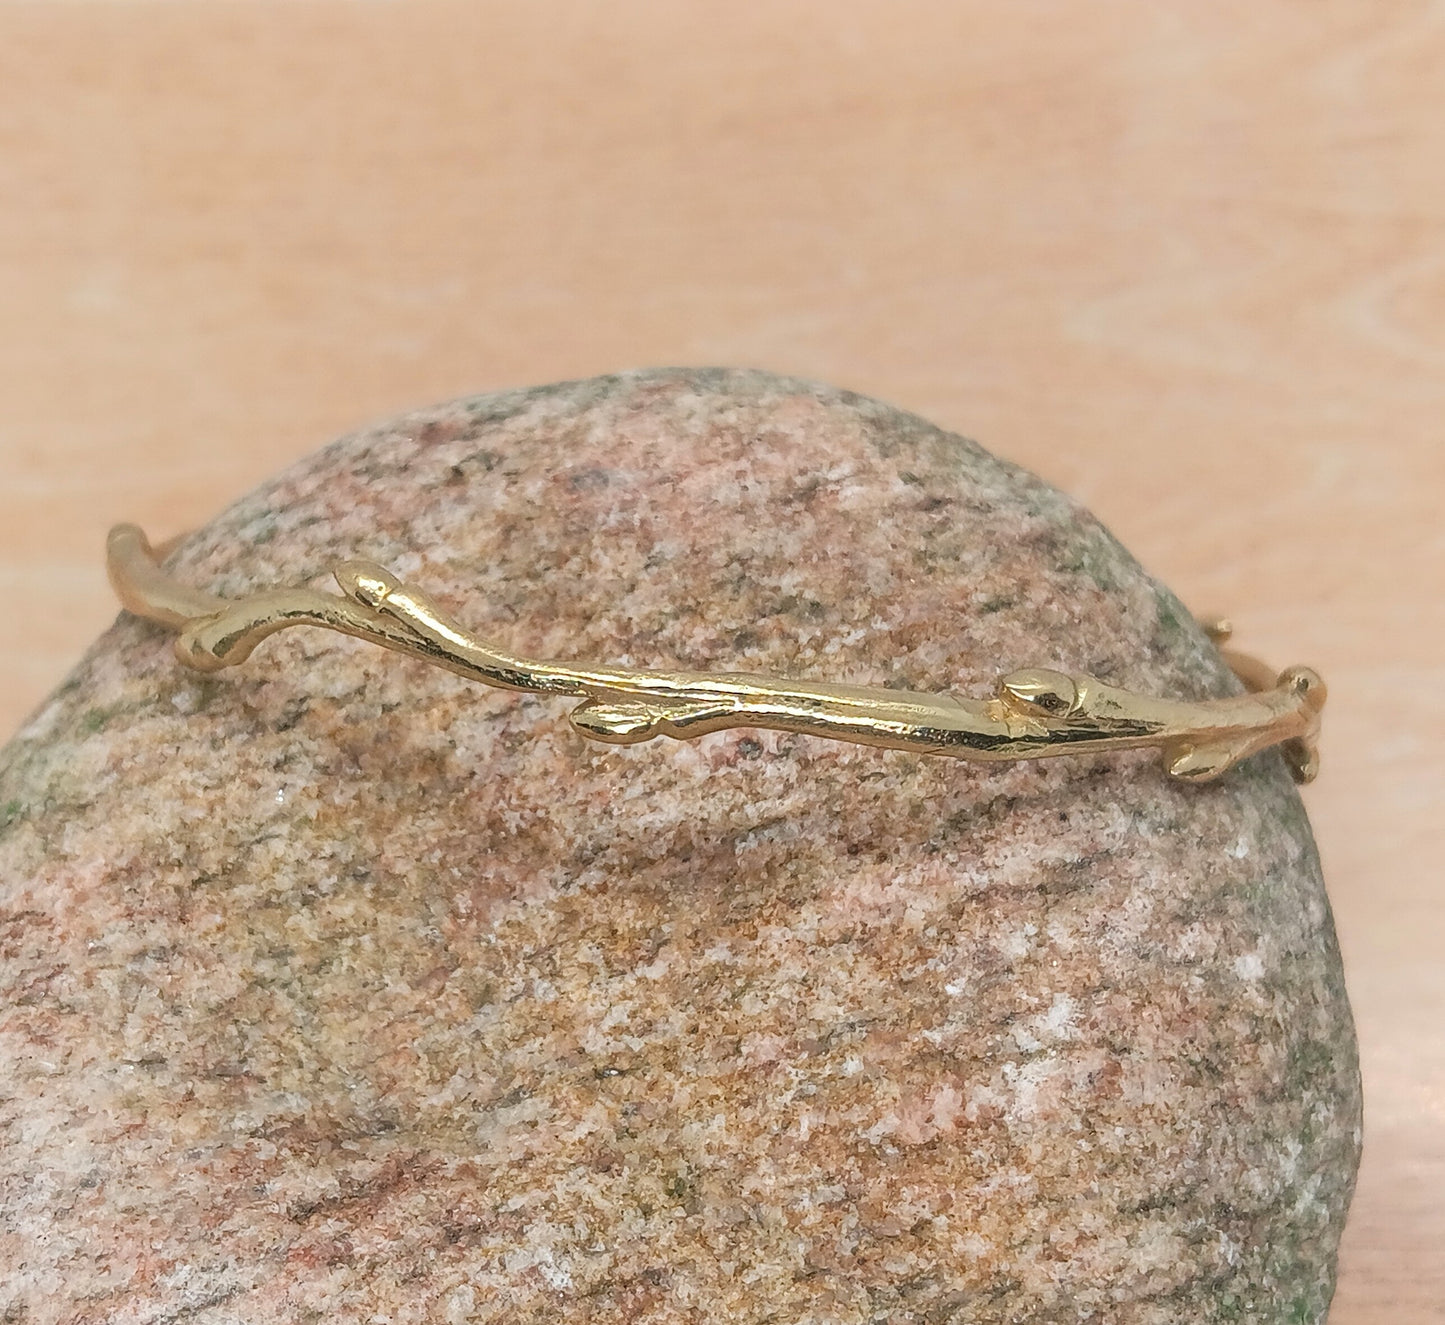 close up of a delicate shiny bronze twig with tiny buds alternating along the length, formed as a closed circle bracelet